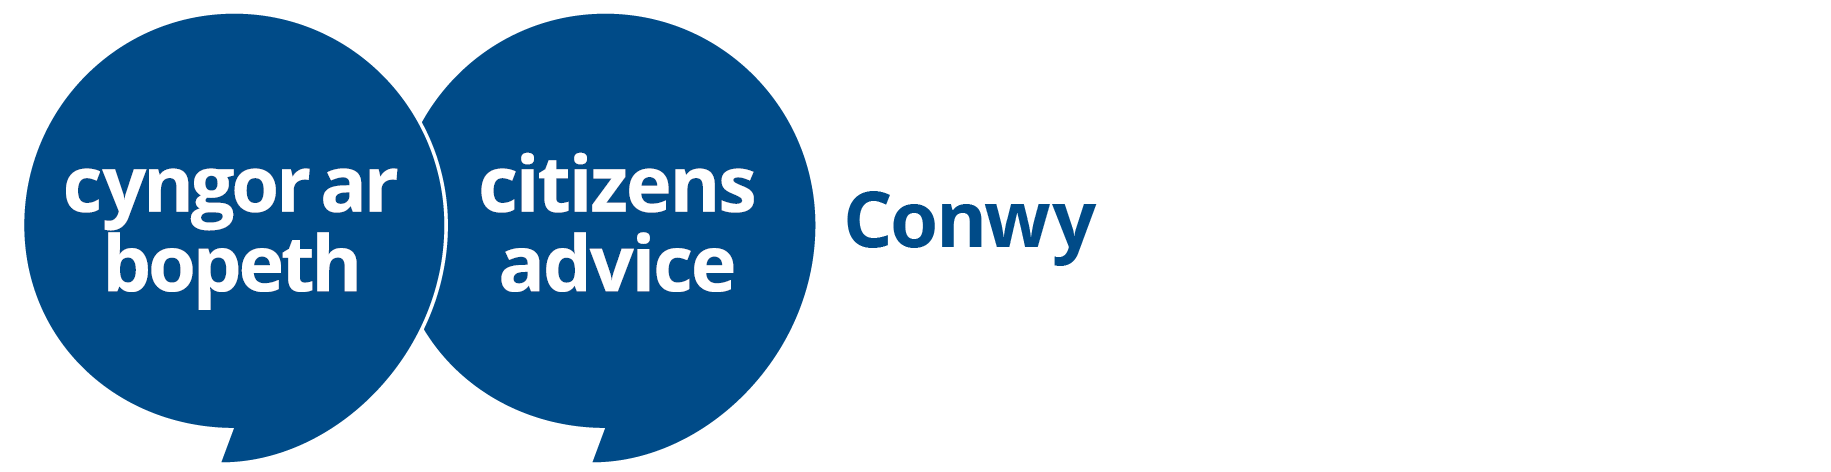 Citizens Advice Conwy home